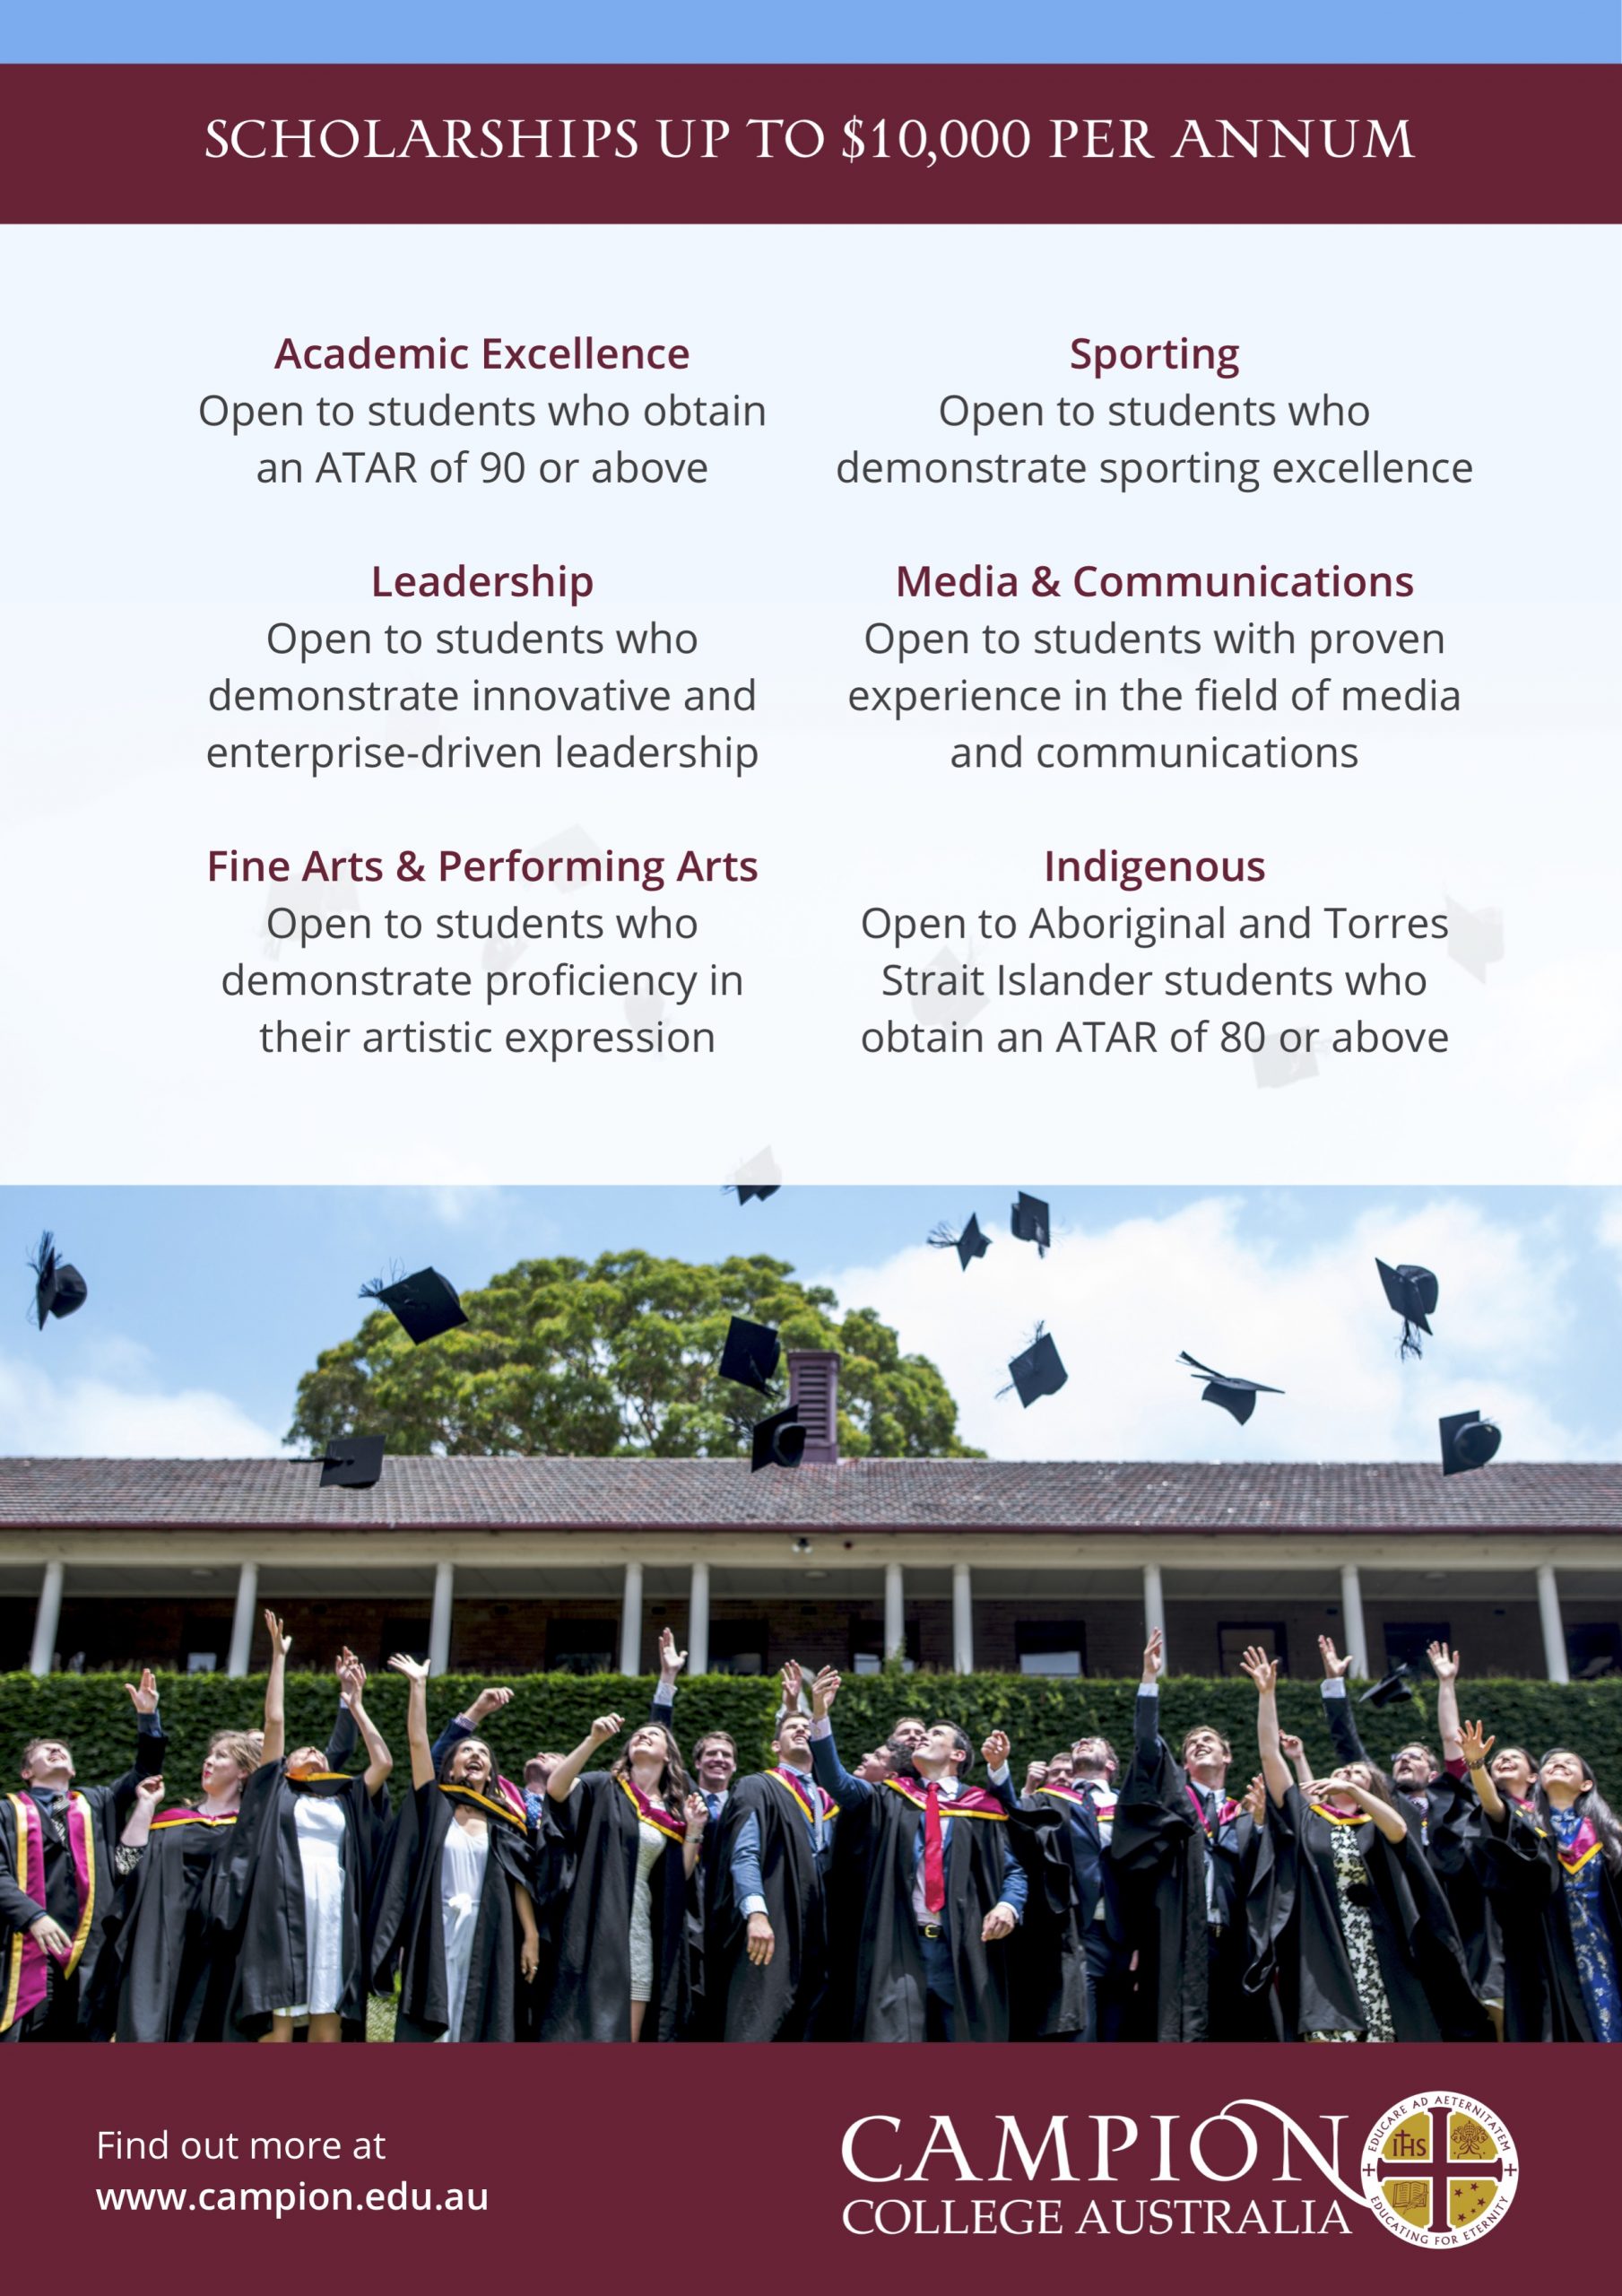 Scholarships-Flyer-scaled. Campion College Australia.